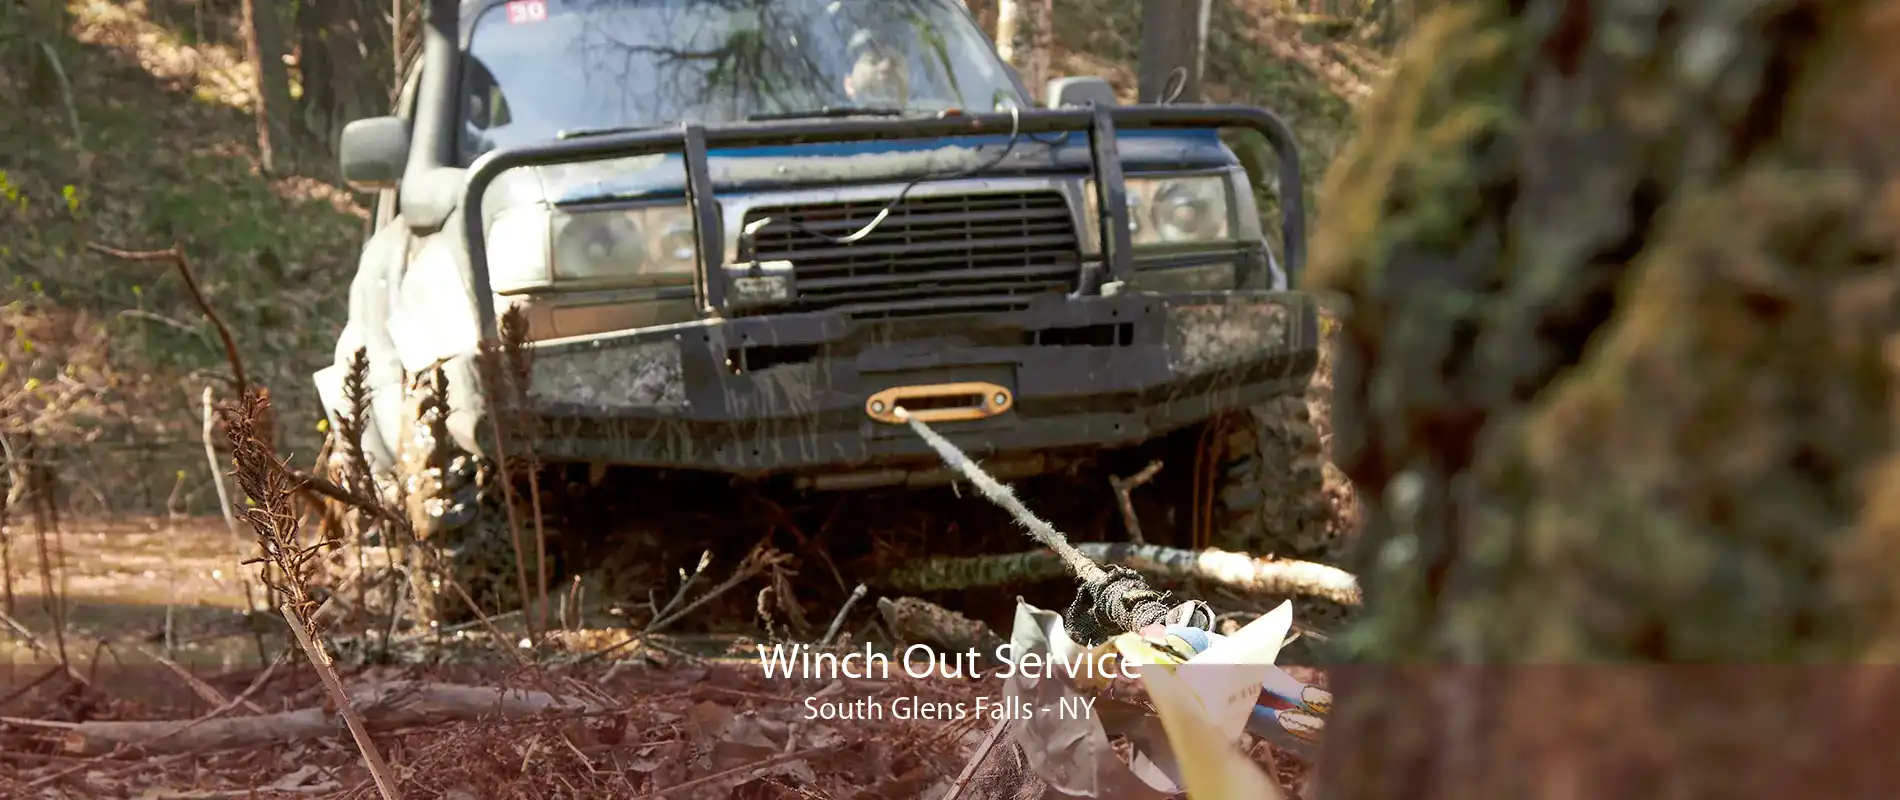 Winch Out Service South Glens Falls - NY